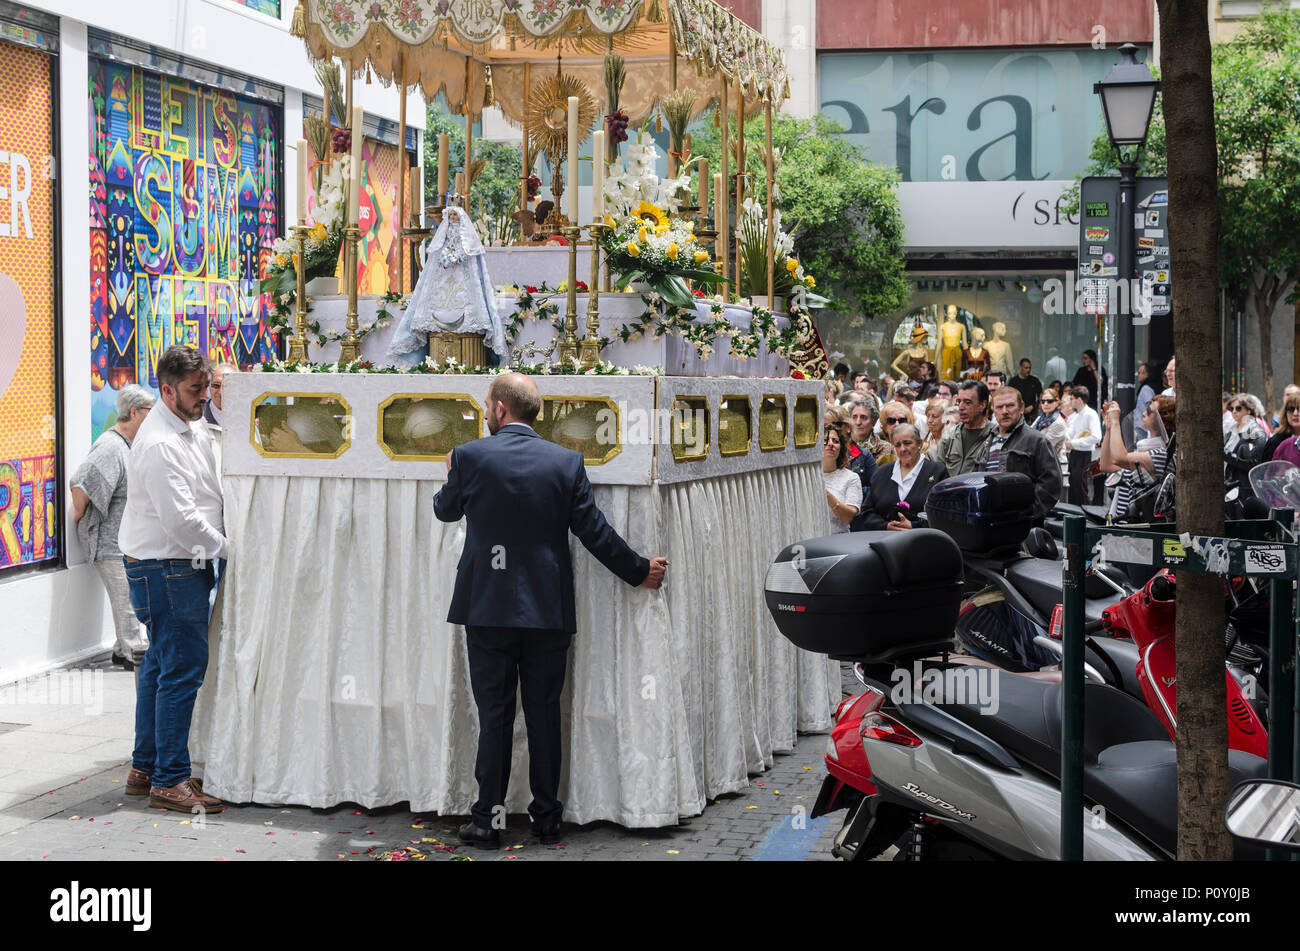 Madrid, Spain, 10 th June, 2018. A view of San Ildefonso procession in Malasaña quarter with public. Madrid, Spain on 10 th June 2018. Credit: Enrique davó/Alamy Live News. Stock Photo